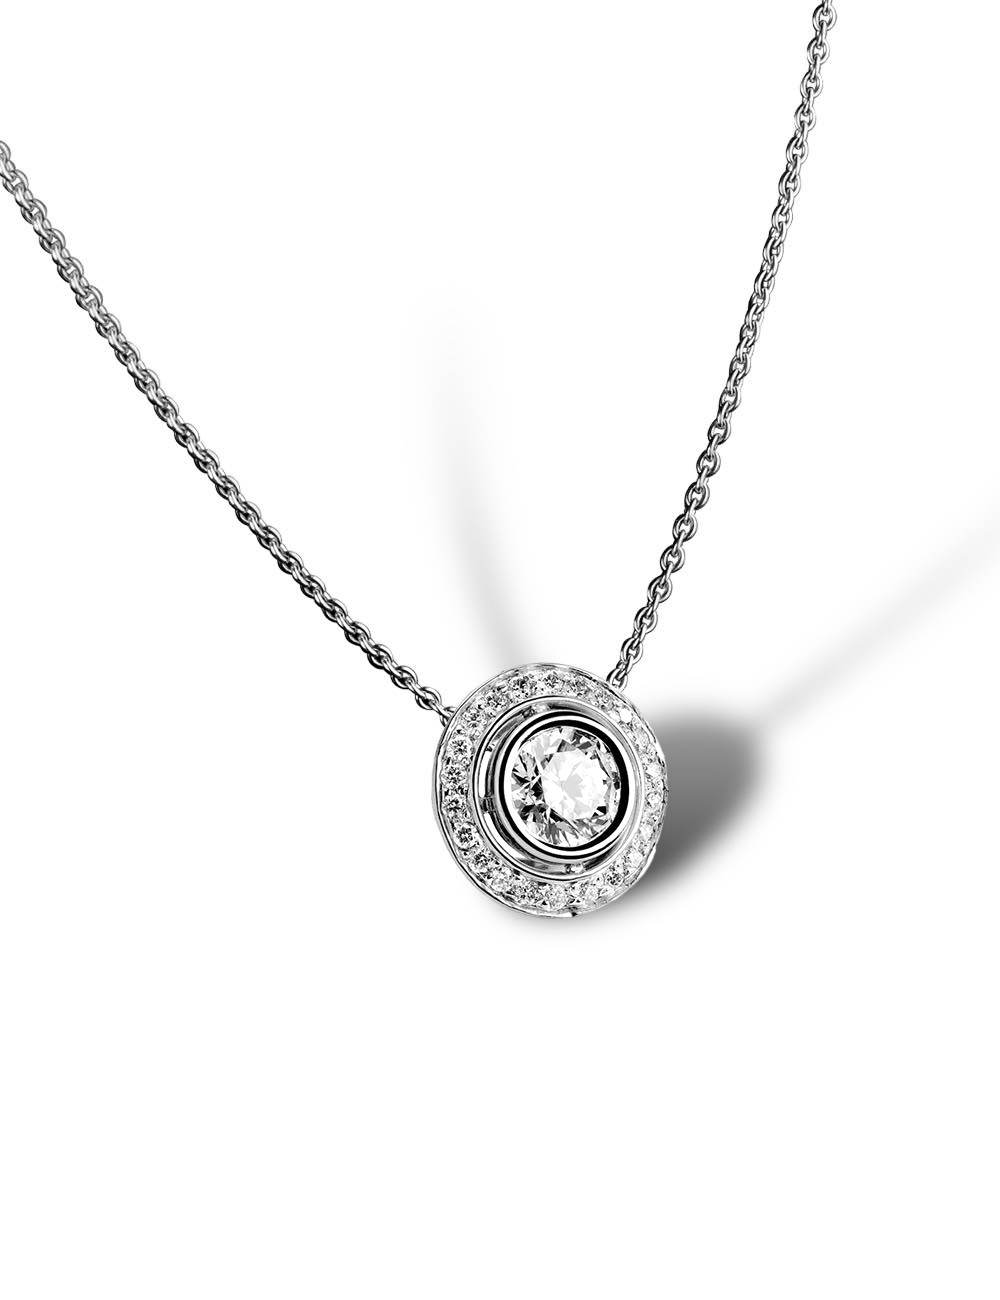 Luxury 0.40ct white diamond necklace, radiant halo, ethical. Timeless elegance and refinement.